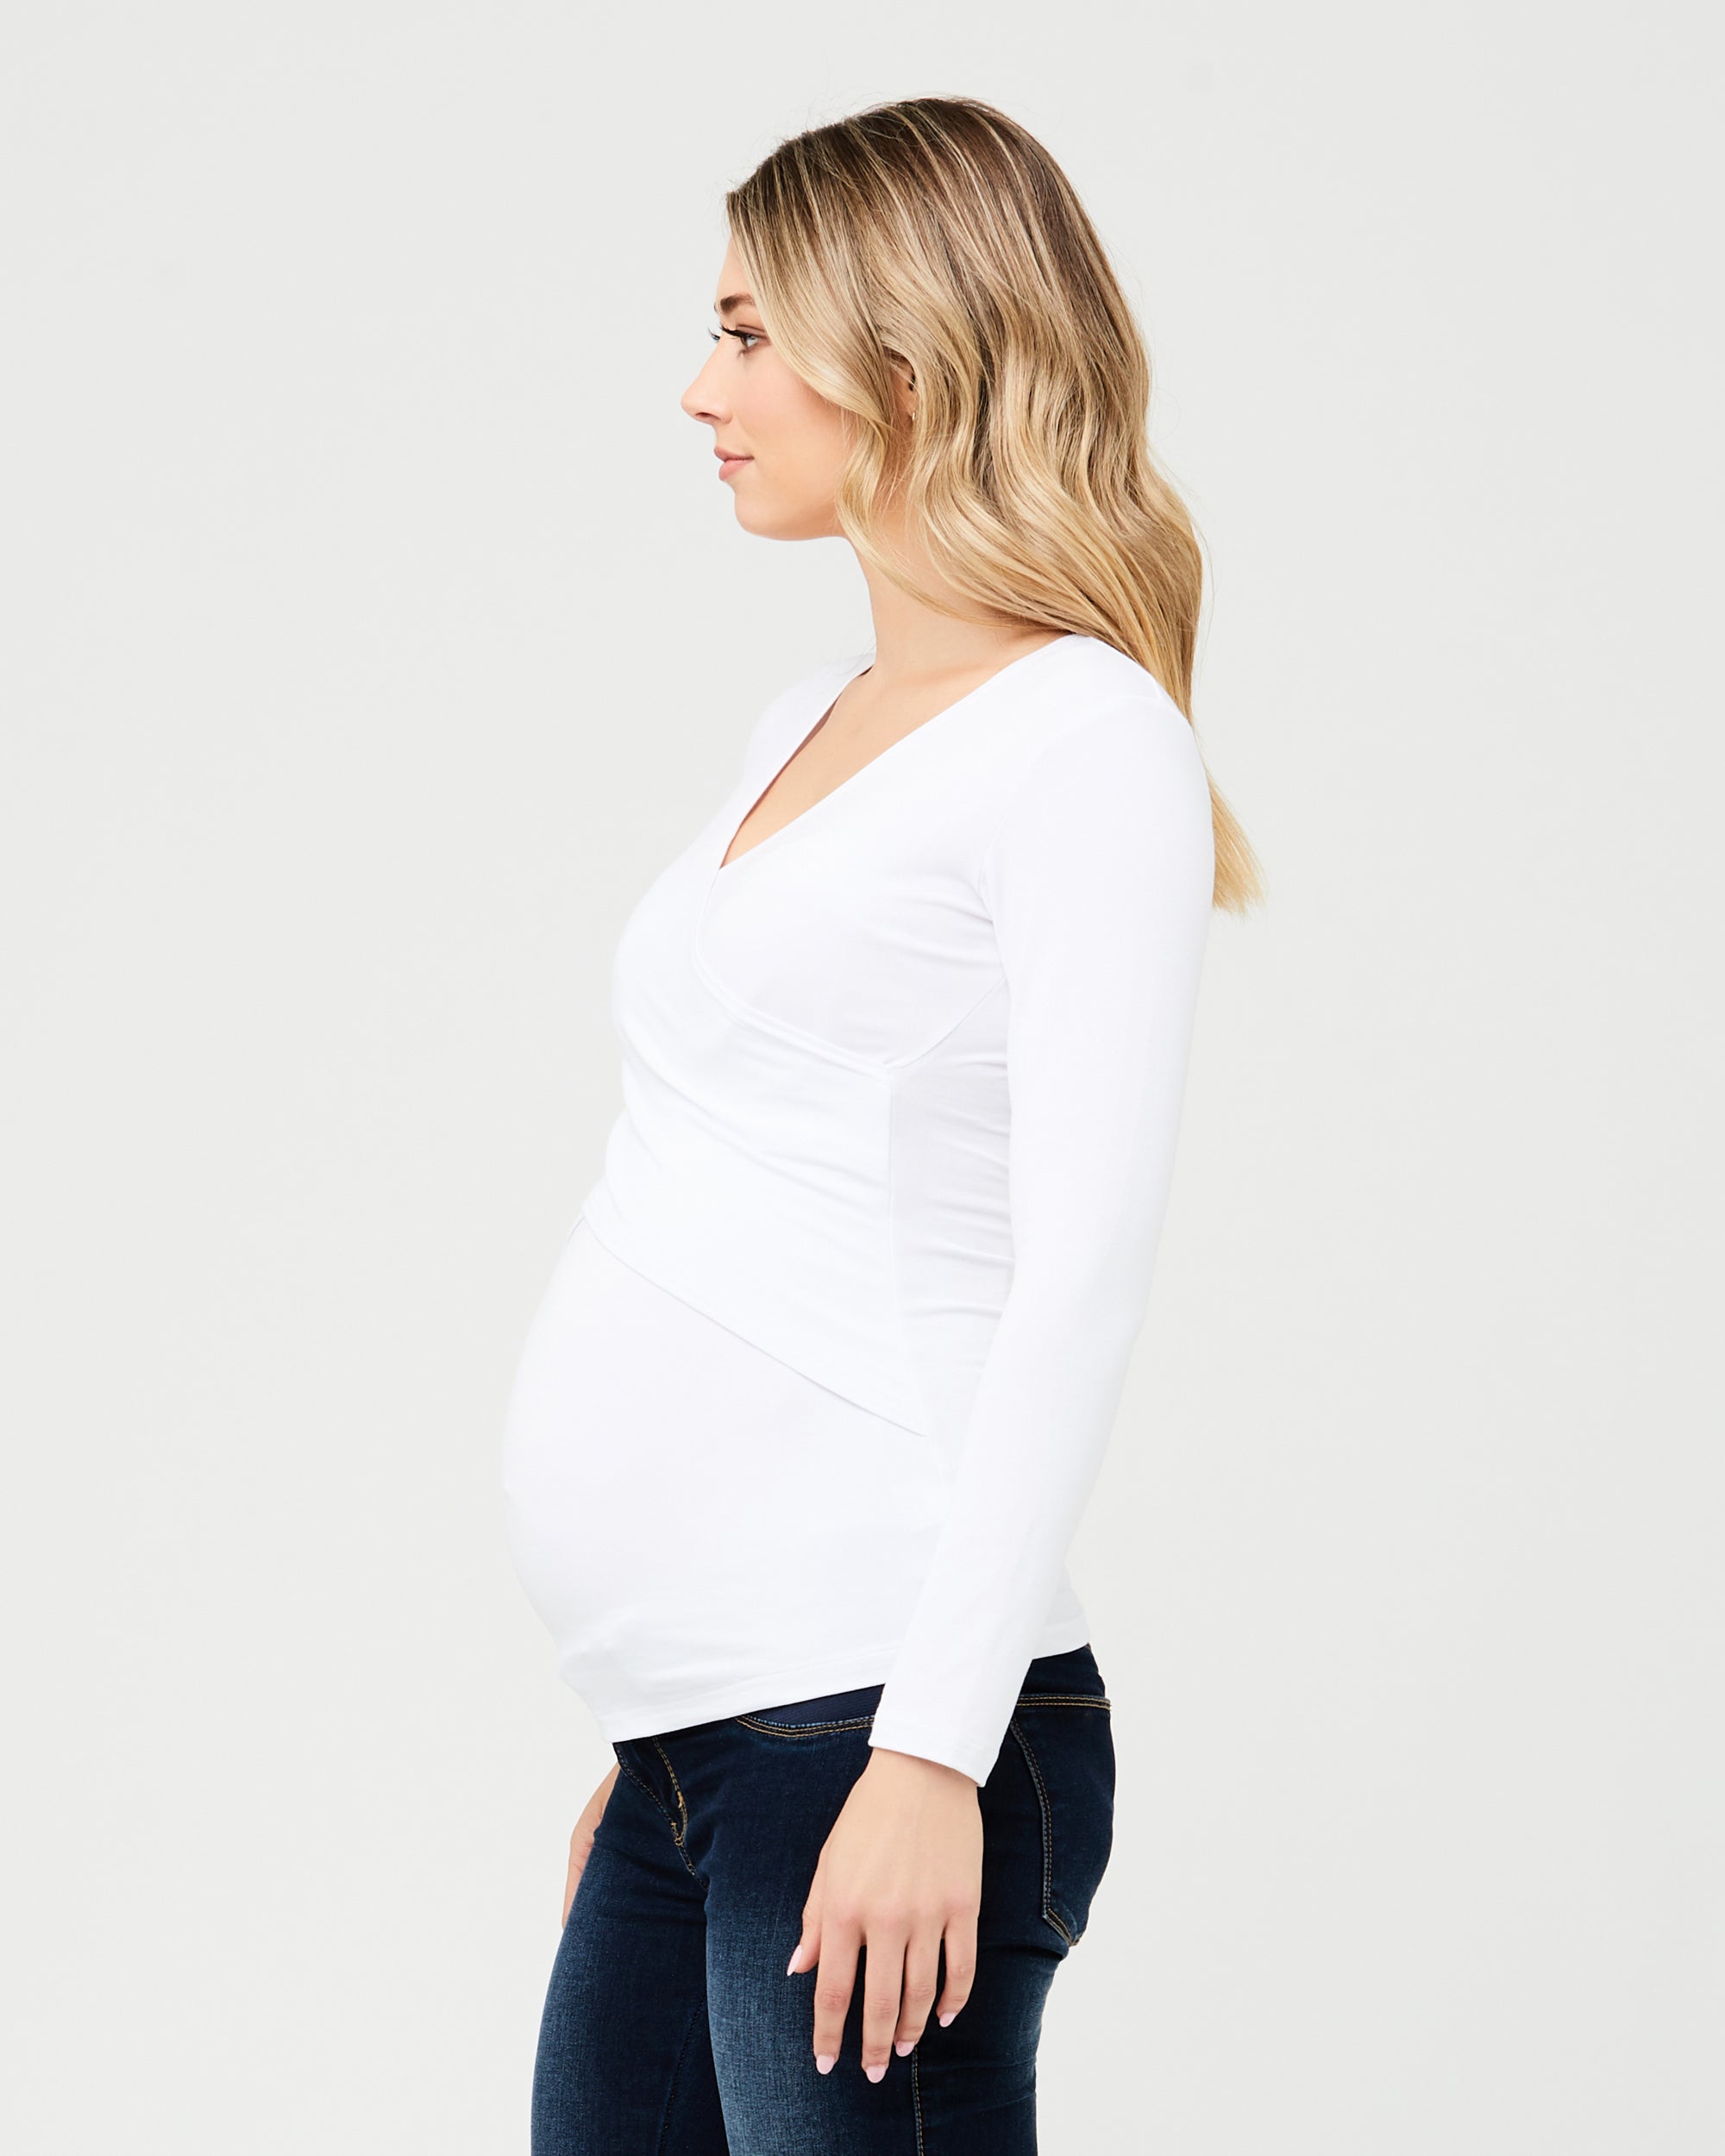 Stylish V Neck Maternity Nursing Top With Long Sleeves For